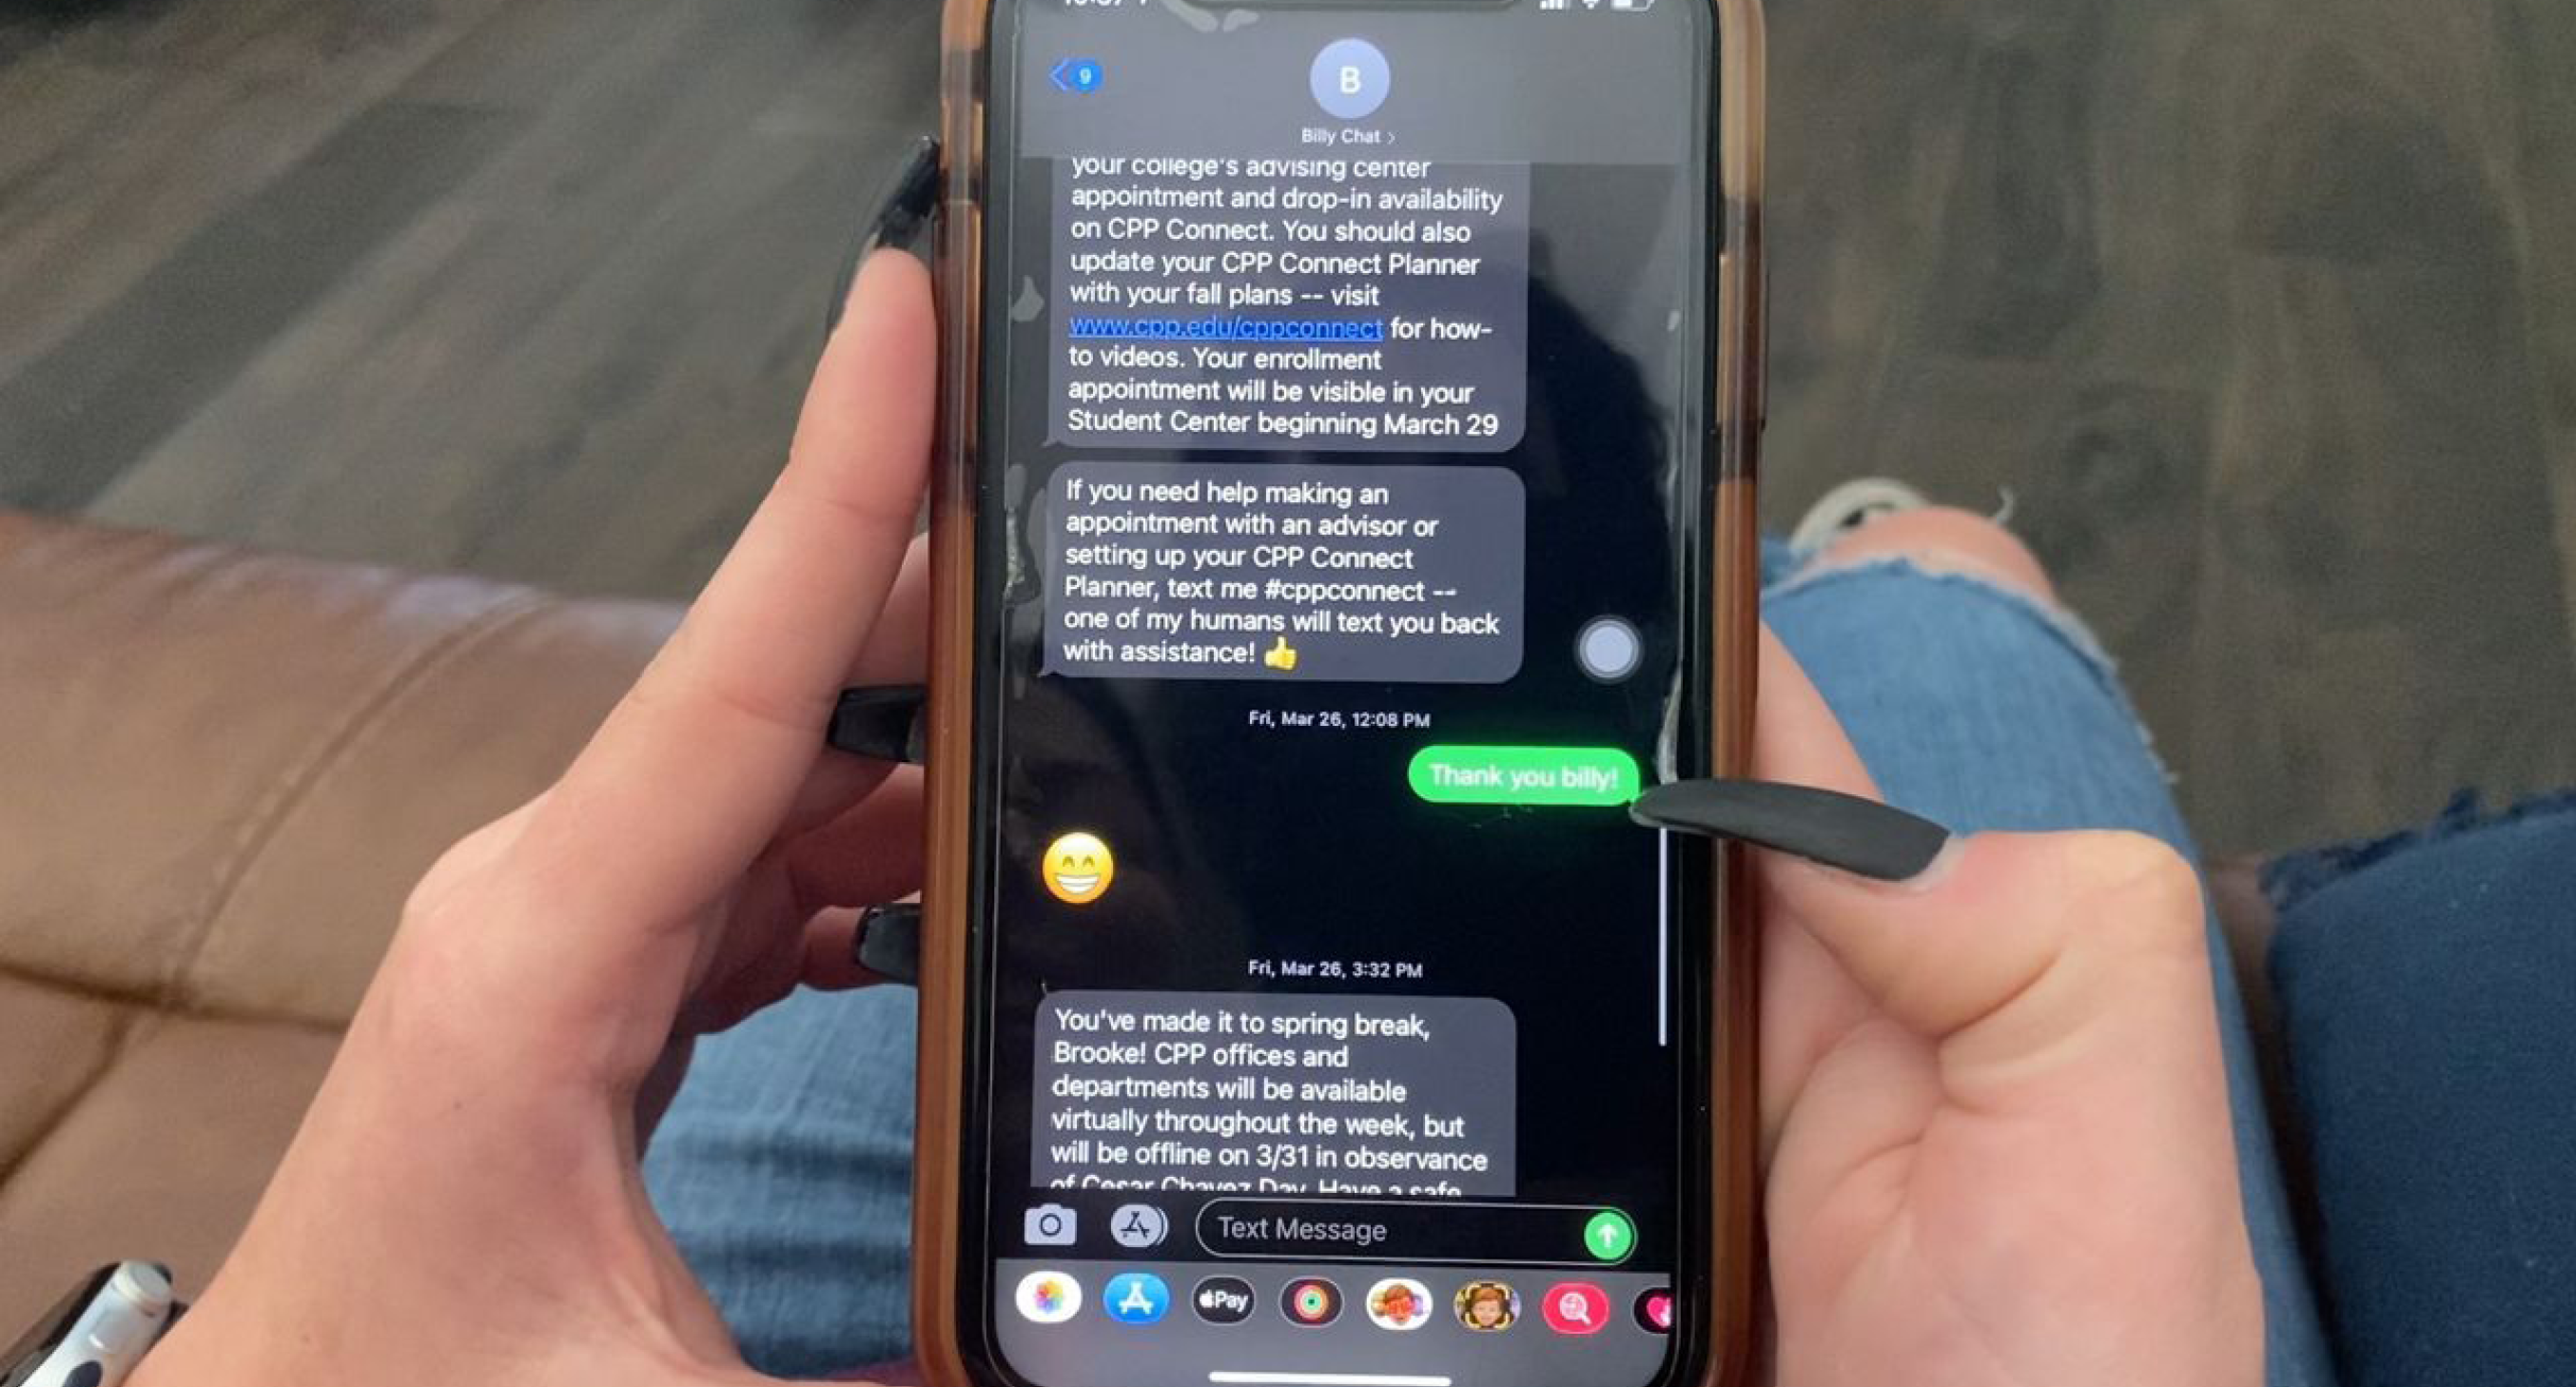 A student holds their phone that's showing text messages from Billy Chat